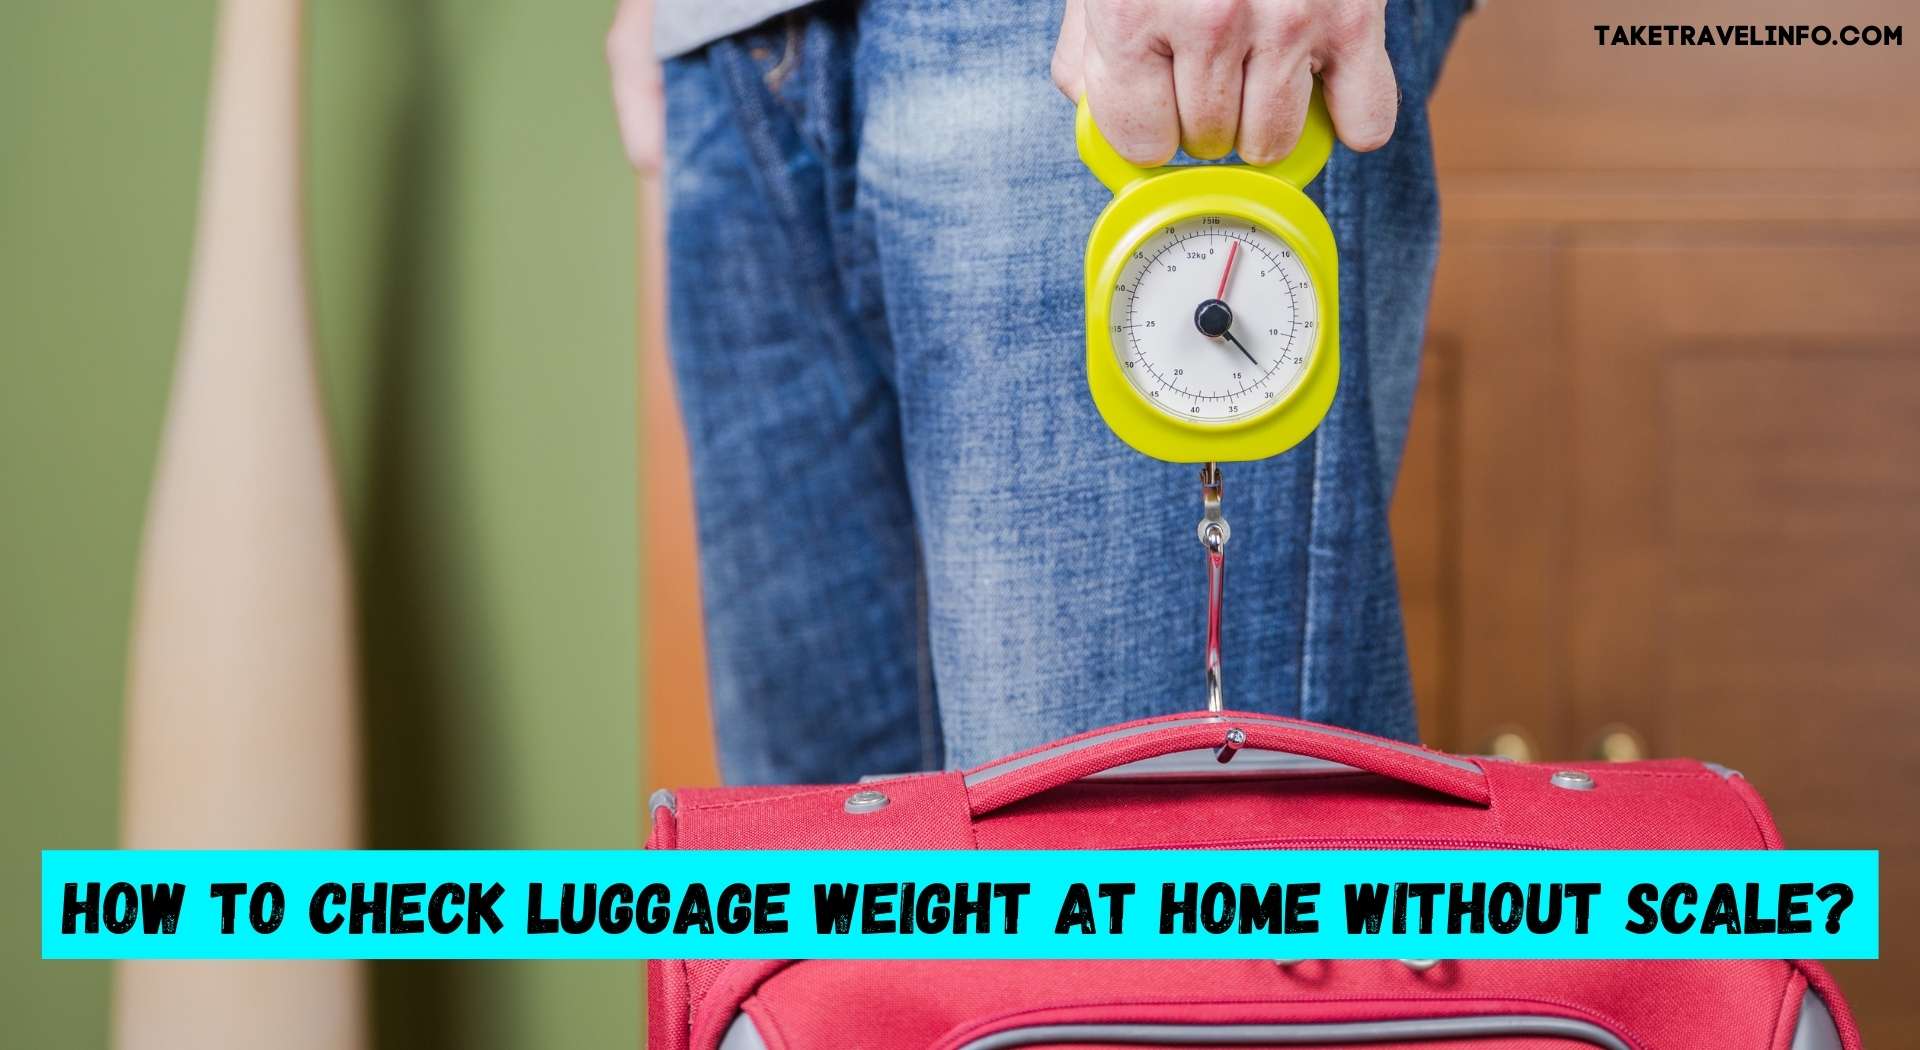 How to Check Luggage Weight at Home Without Scale?